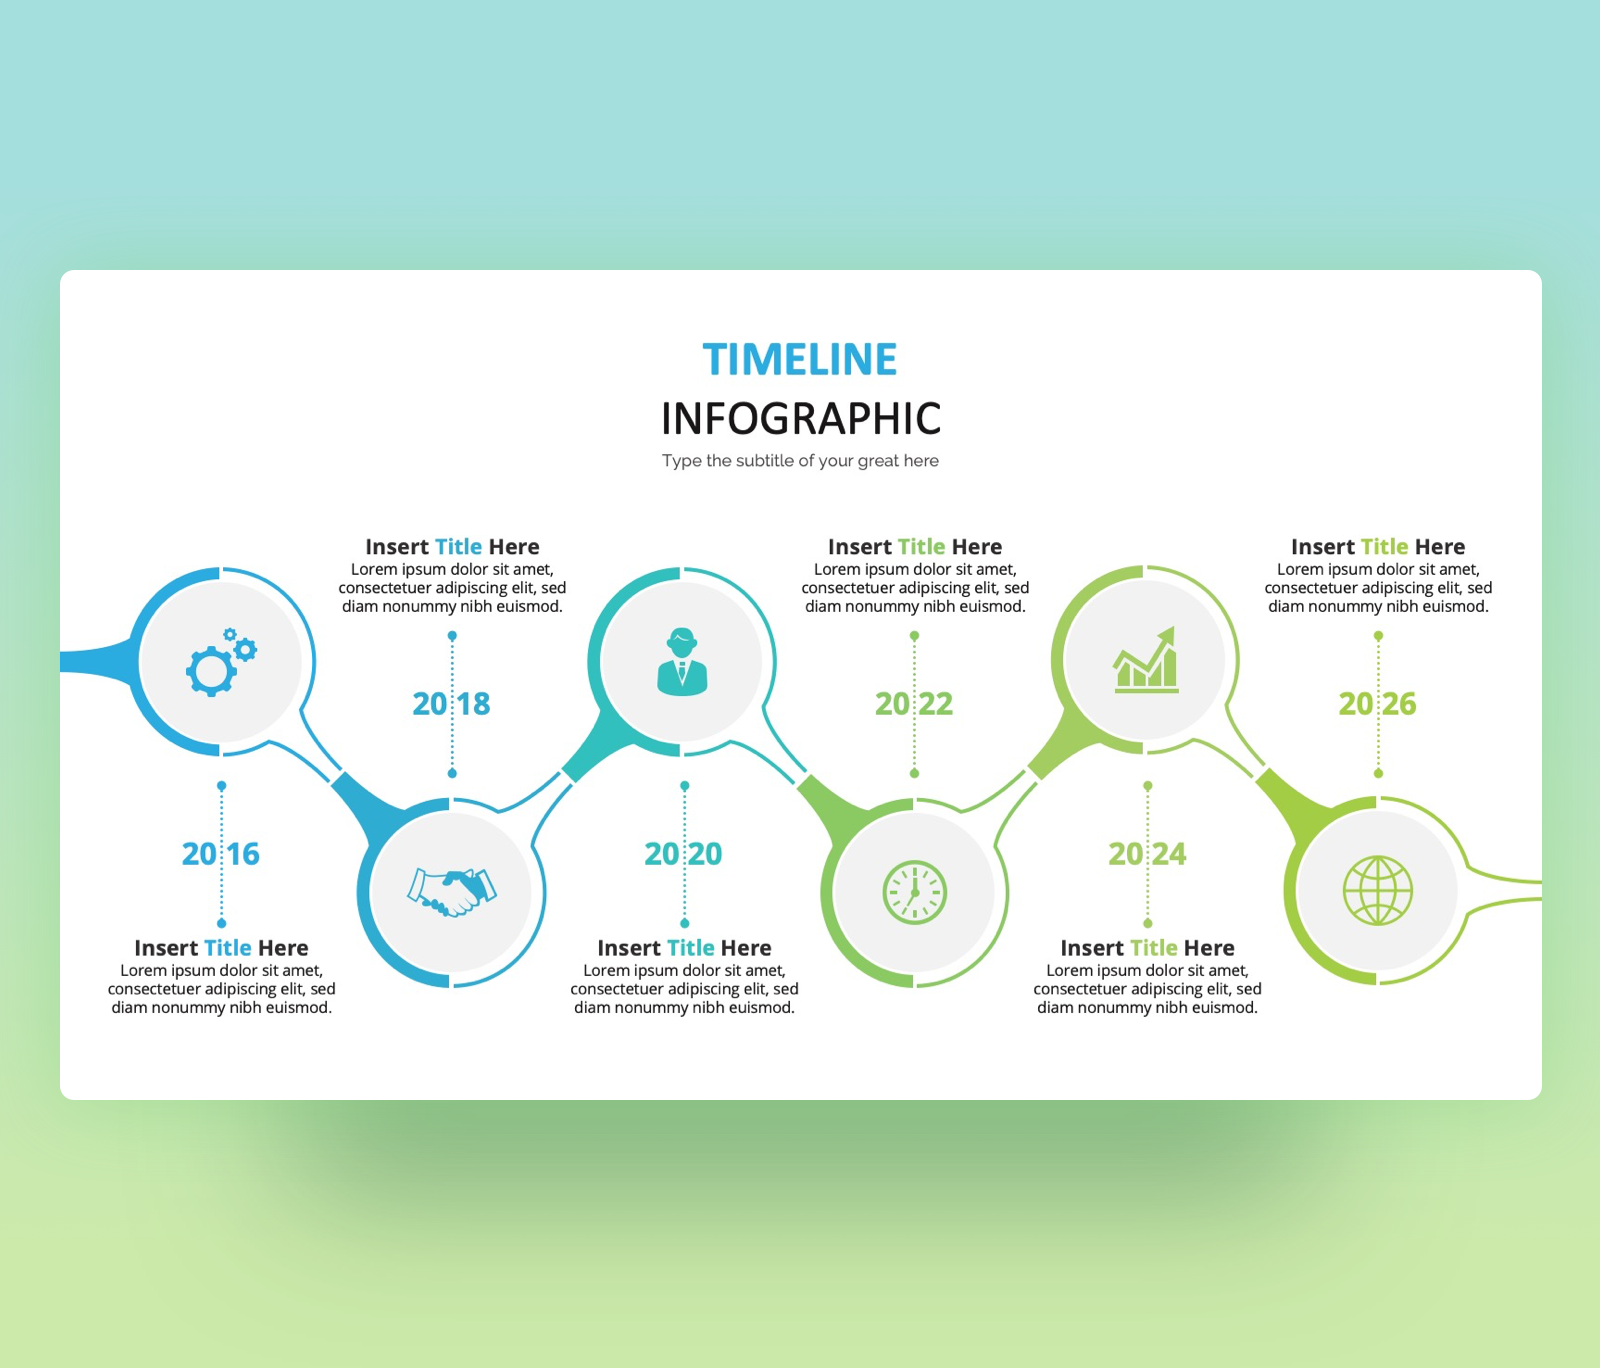 timeline infographic template - Google Search | Timeline design, Timeline infographic, Infographic